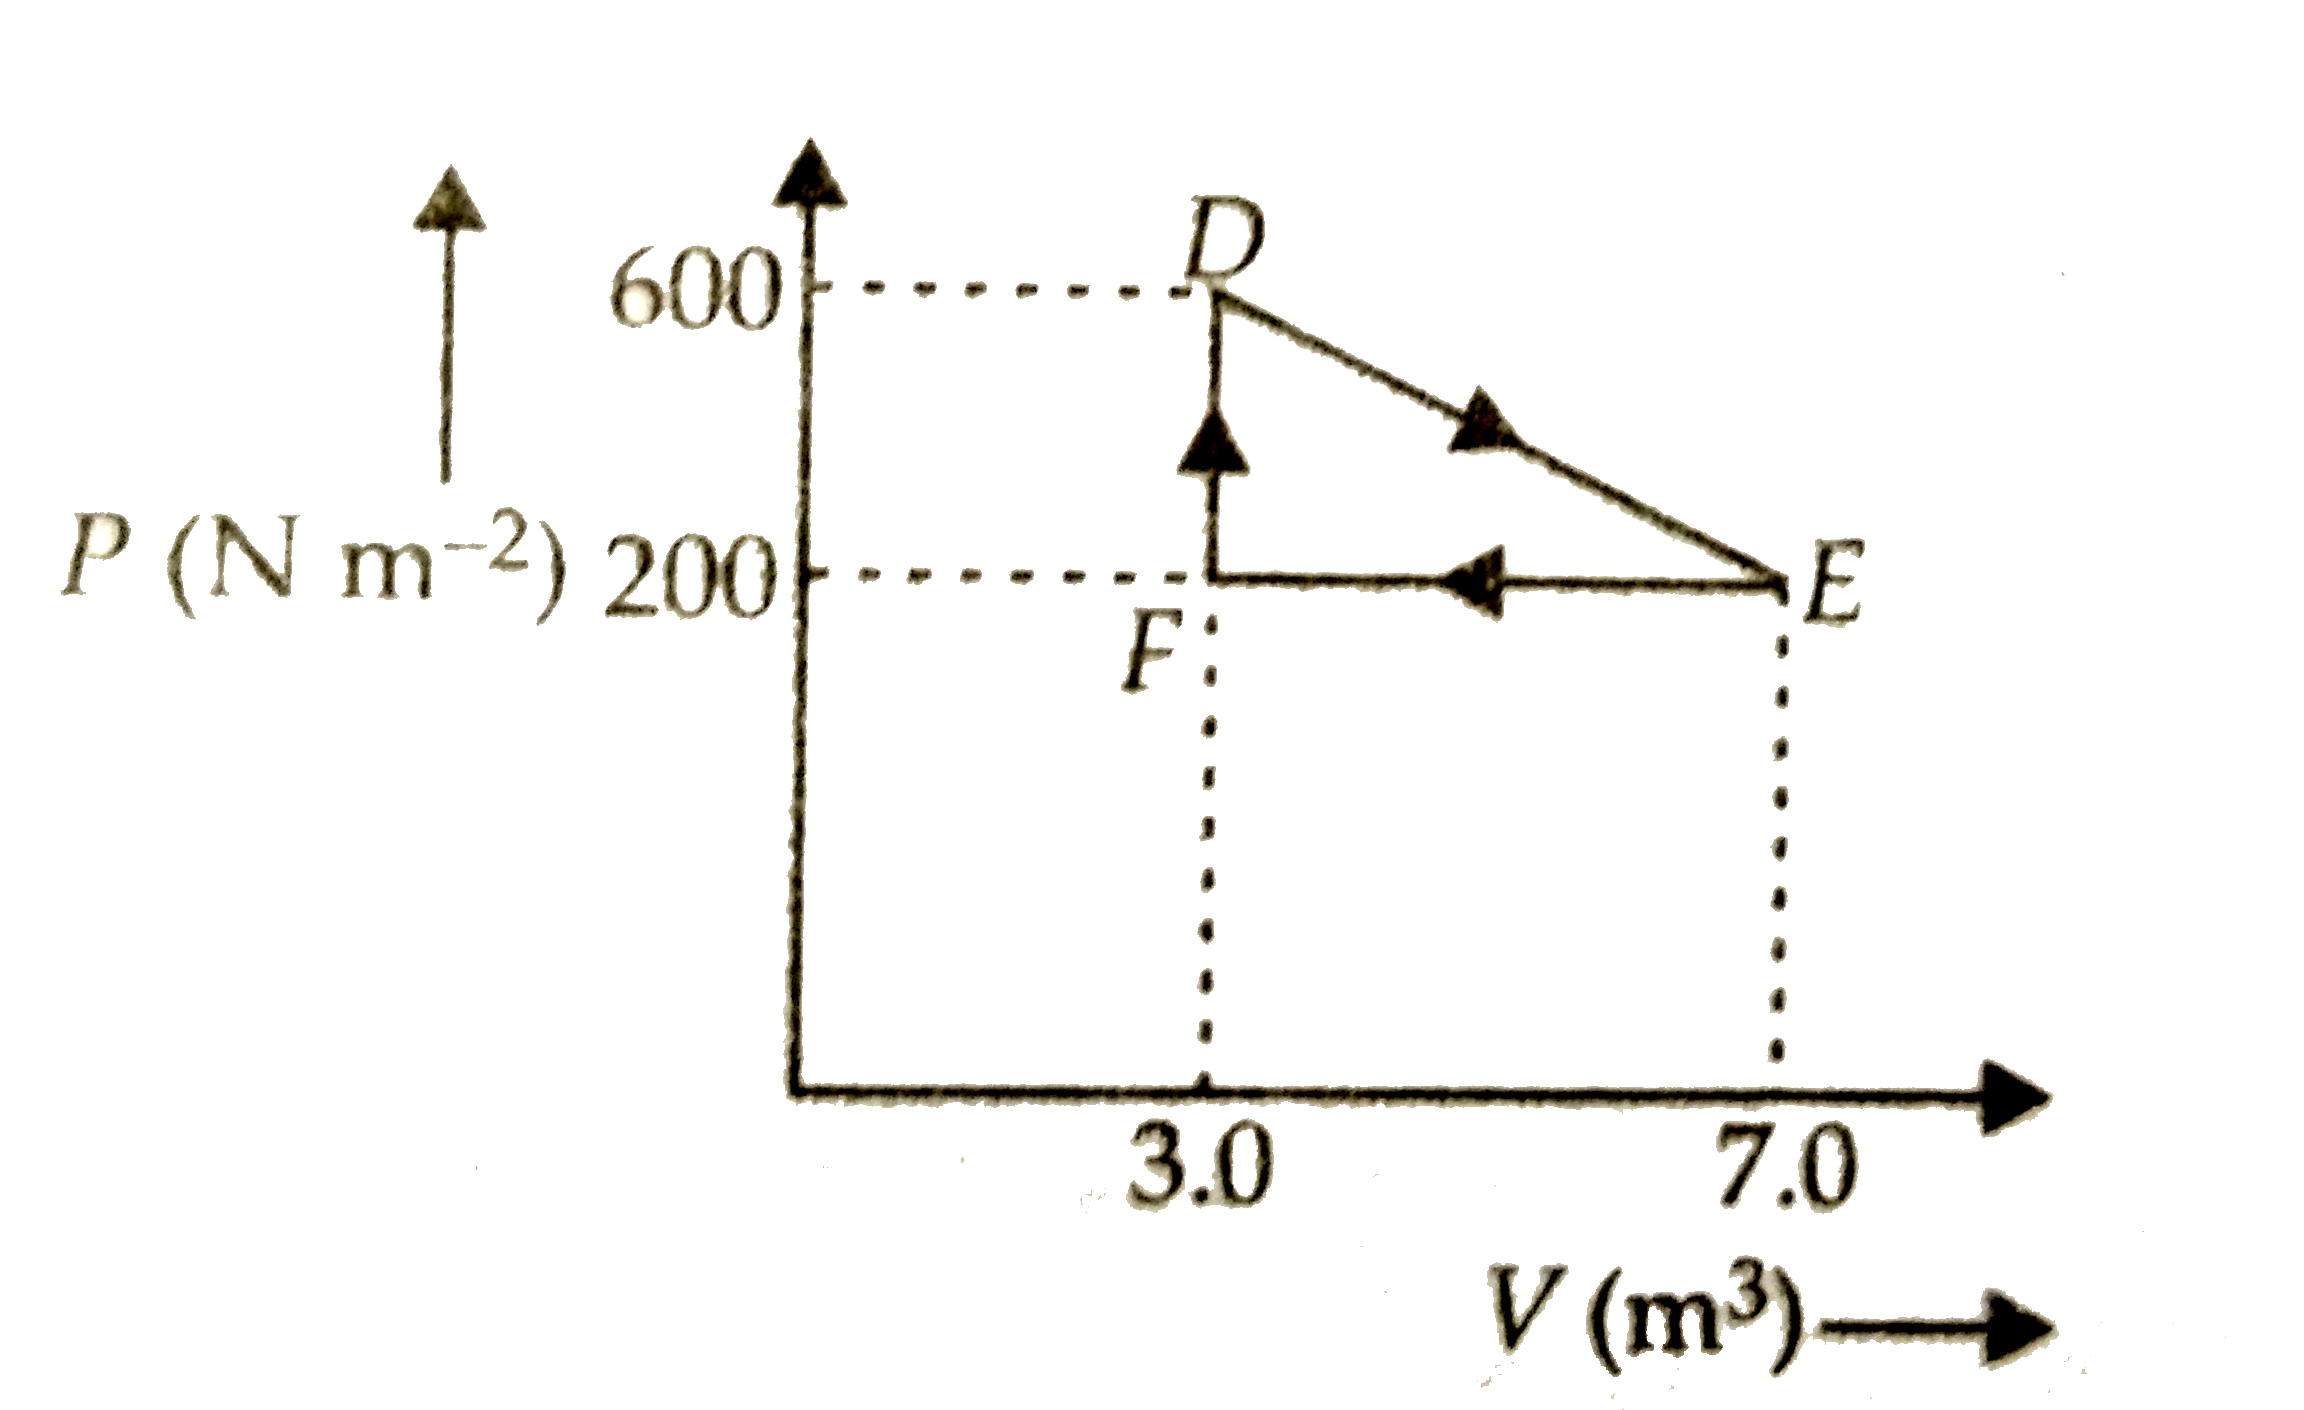 A thermodynamic process is carried out from an original state D to an intermediate state E by the linear process shown in figure. The total work is done by the gas from D to E to F is